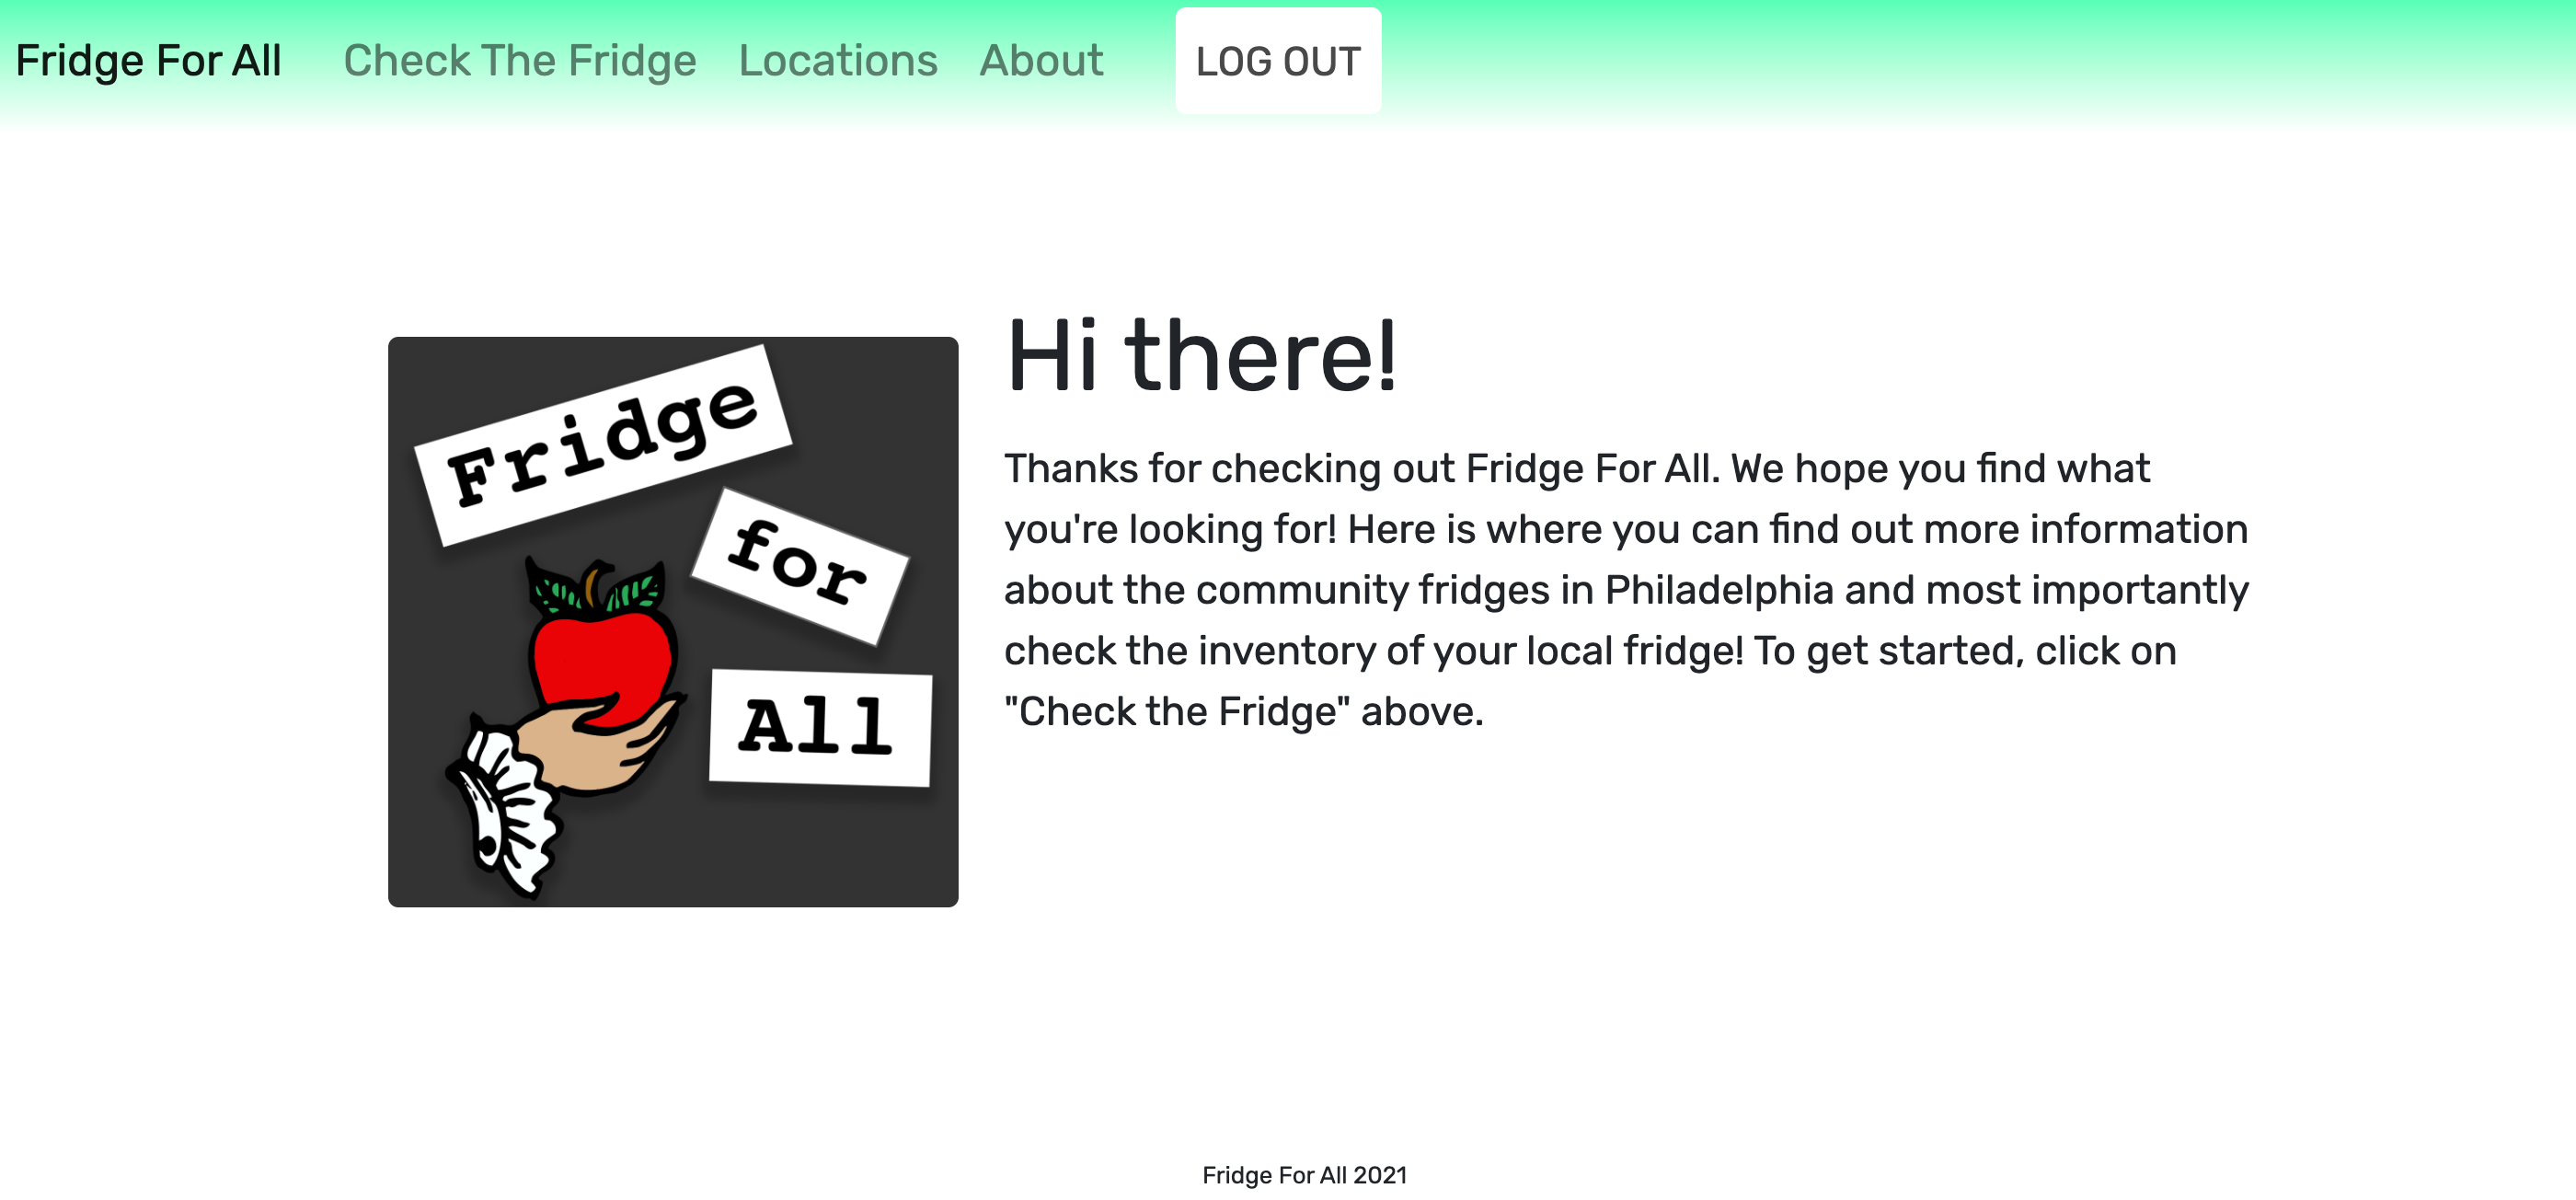 "The main landing page for Fridge For All"